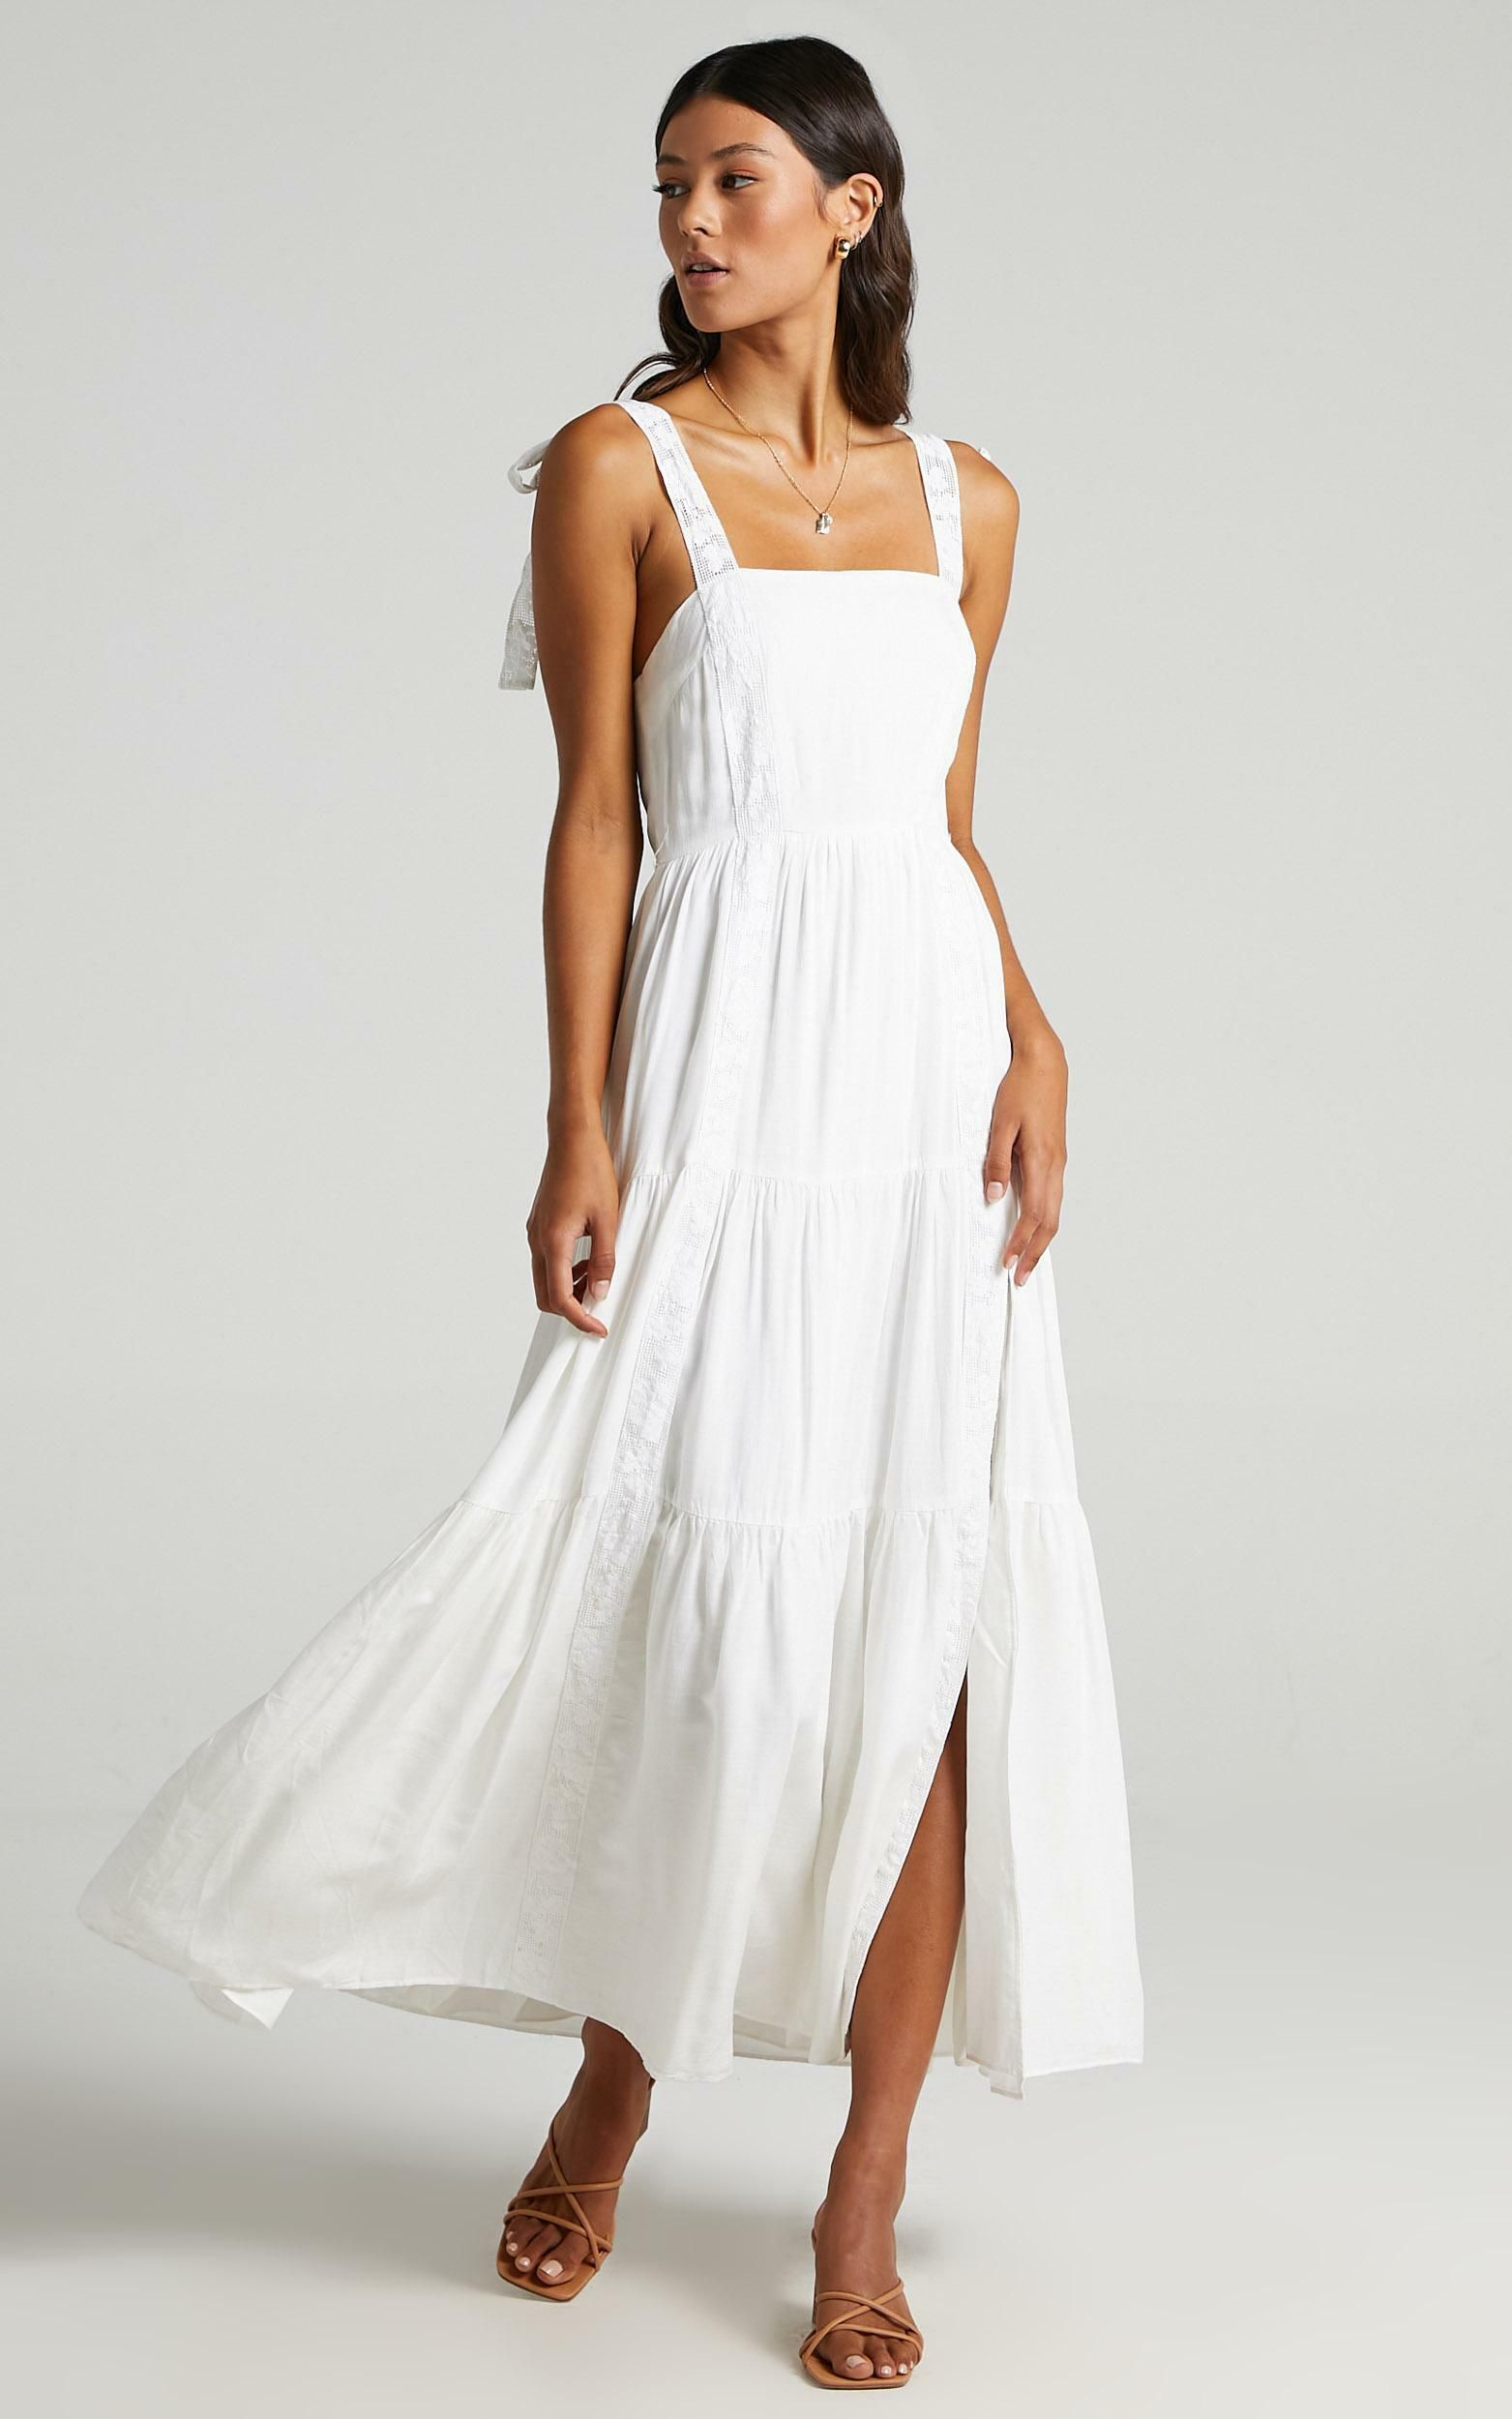 Afternoon Stroll Maxi Dress in White | Showpo - deactived